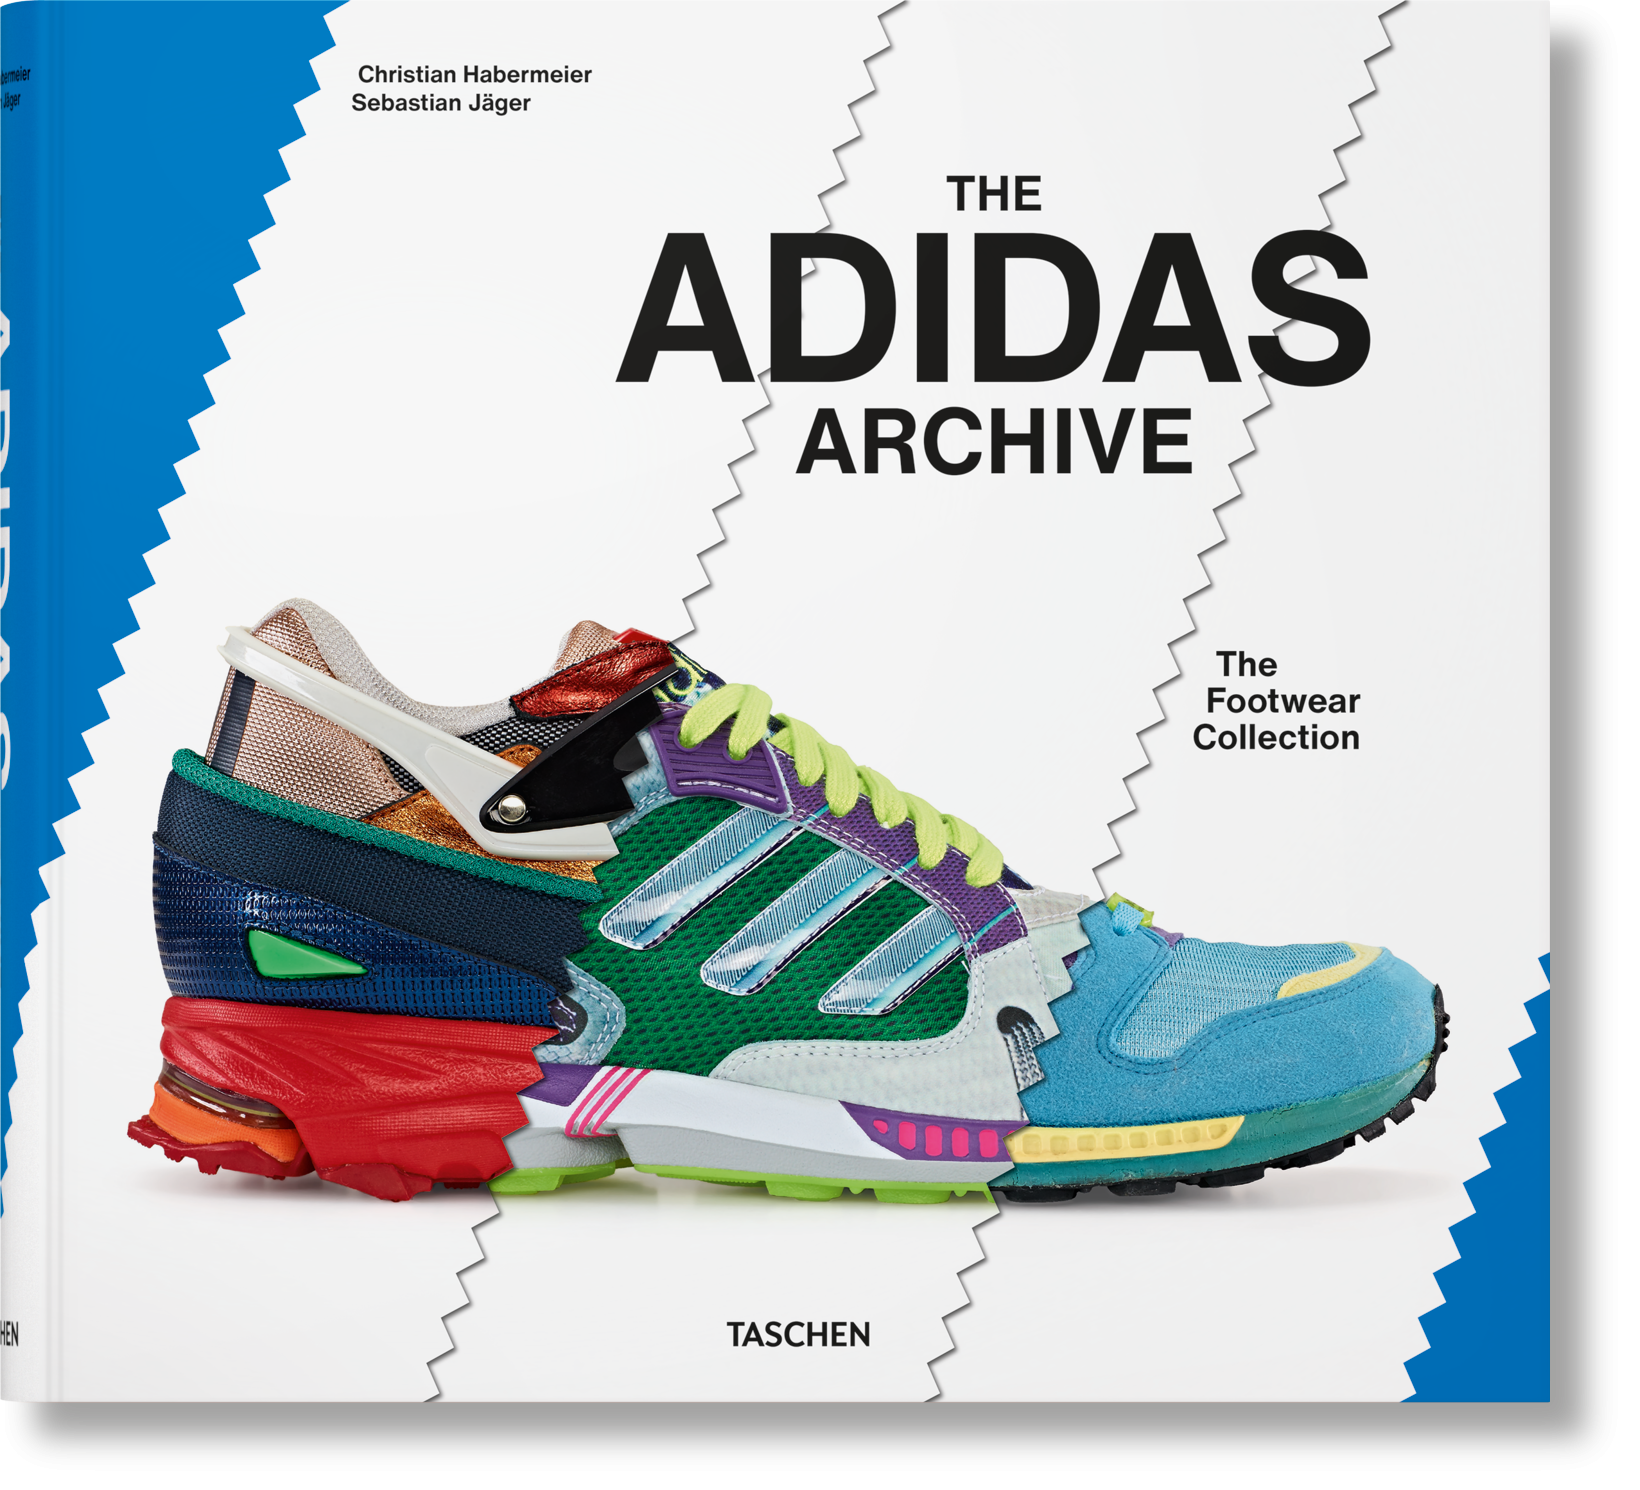 TASCHEN Books: The adidas Archive. The Footwear